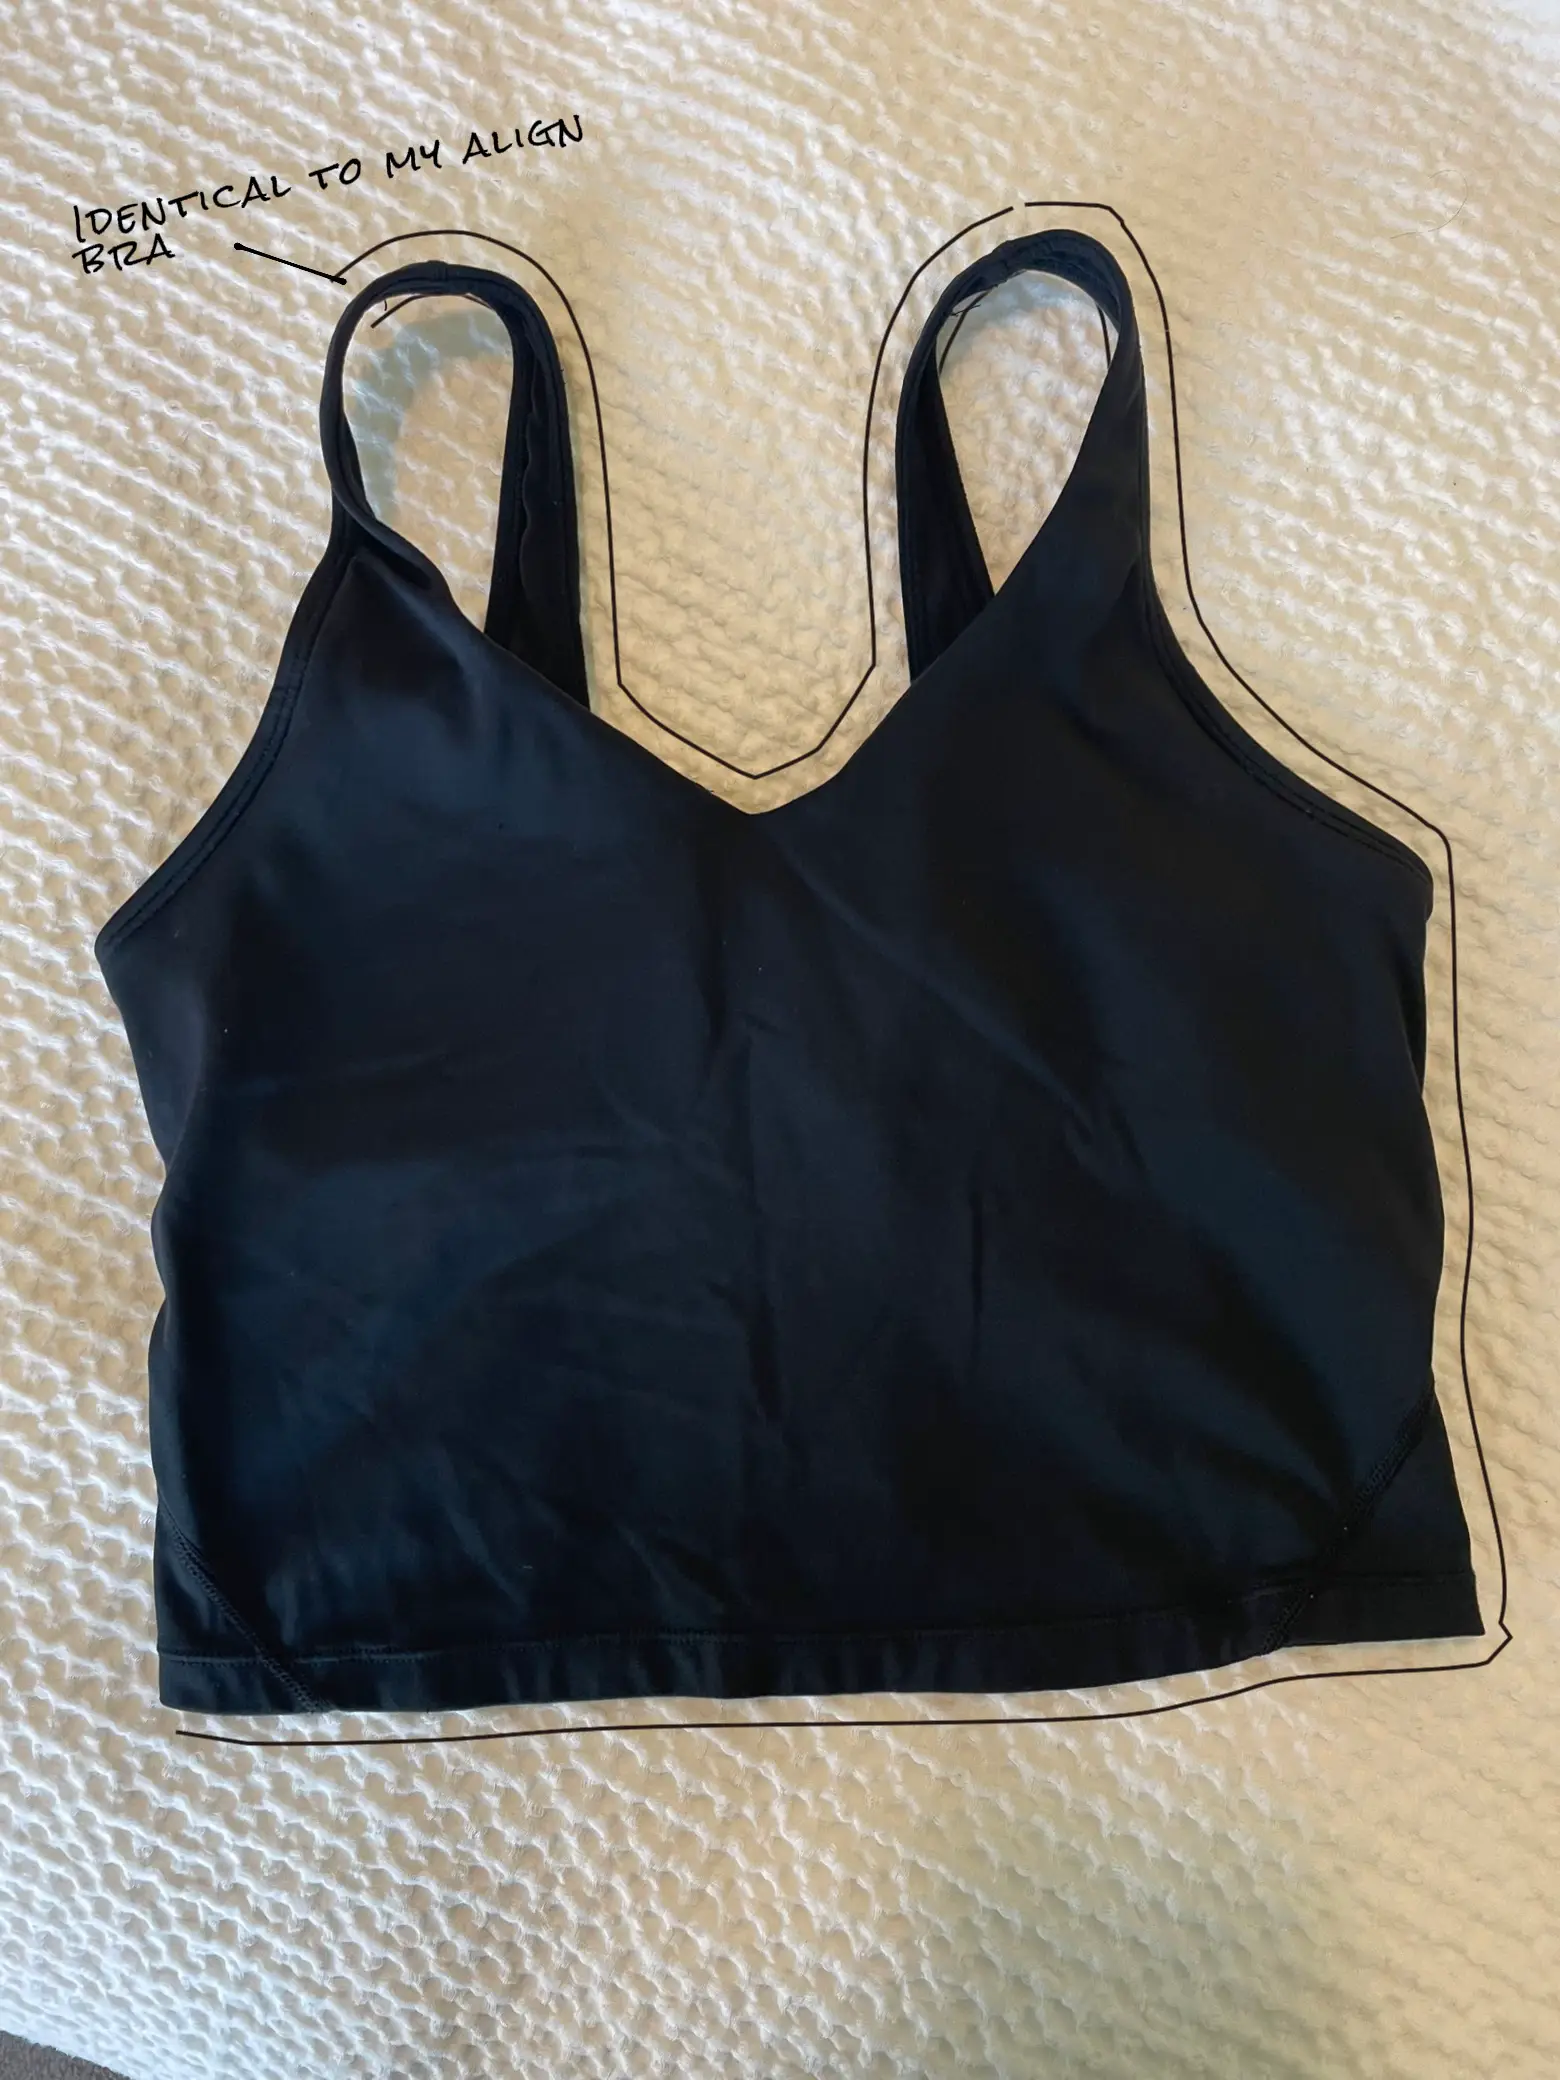 Lululemon Sonic Pink Align Tank Size 12 - $36 - From Isabel